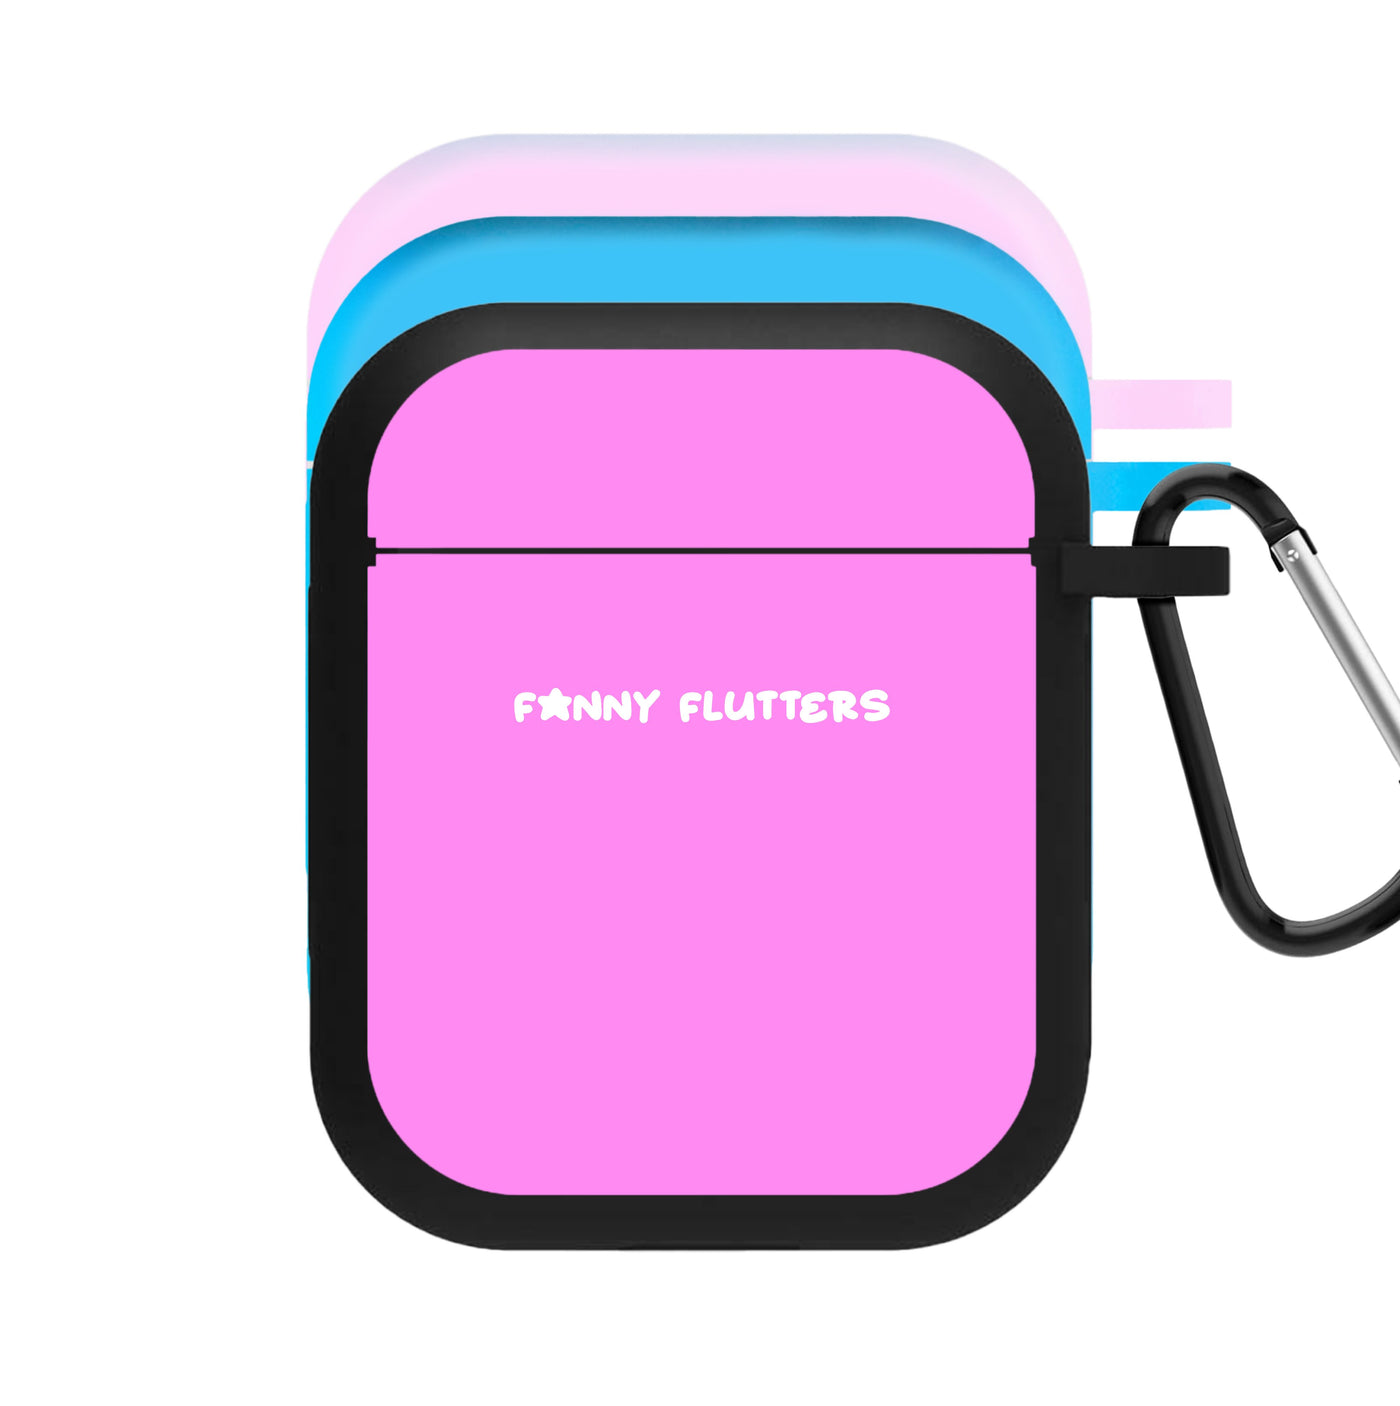 F*nny Flutters - Islanders AirPods Case